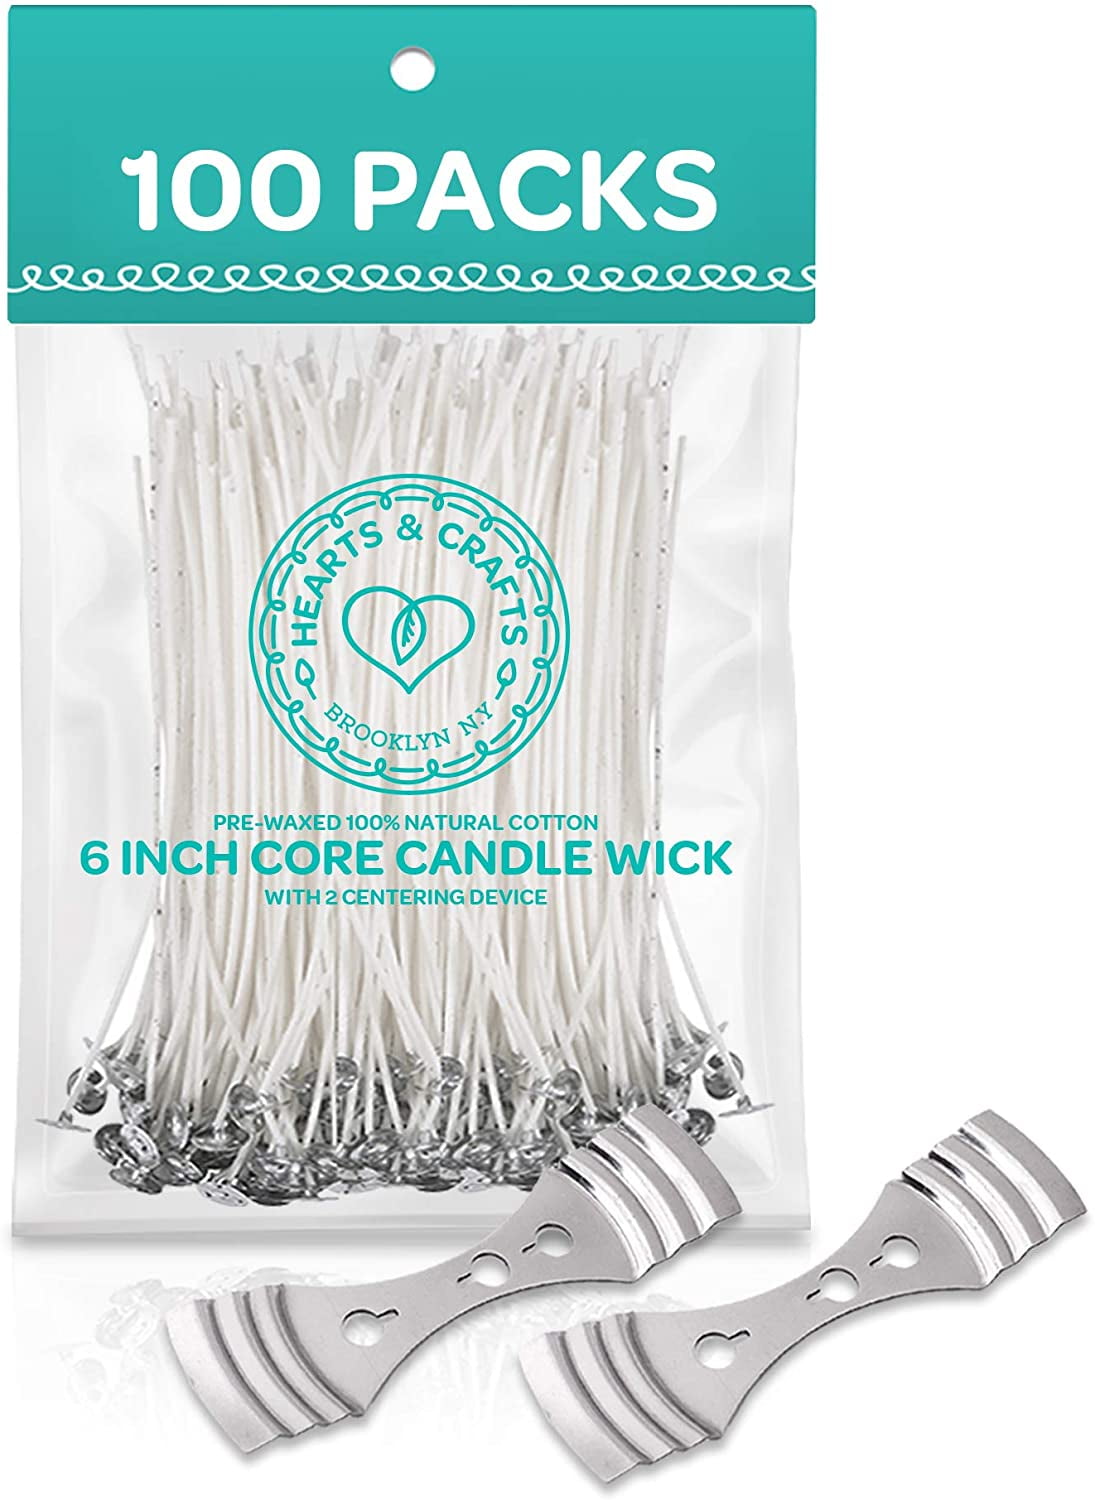 Hearts & Crafts Candle Wicks - 100% Natural Cotton, Pre-Waxed, Low Smoke 6 inch Wicks for DIY Candle Making, 100 Wicks Plus 2 Centering Devices